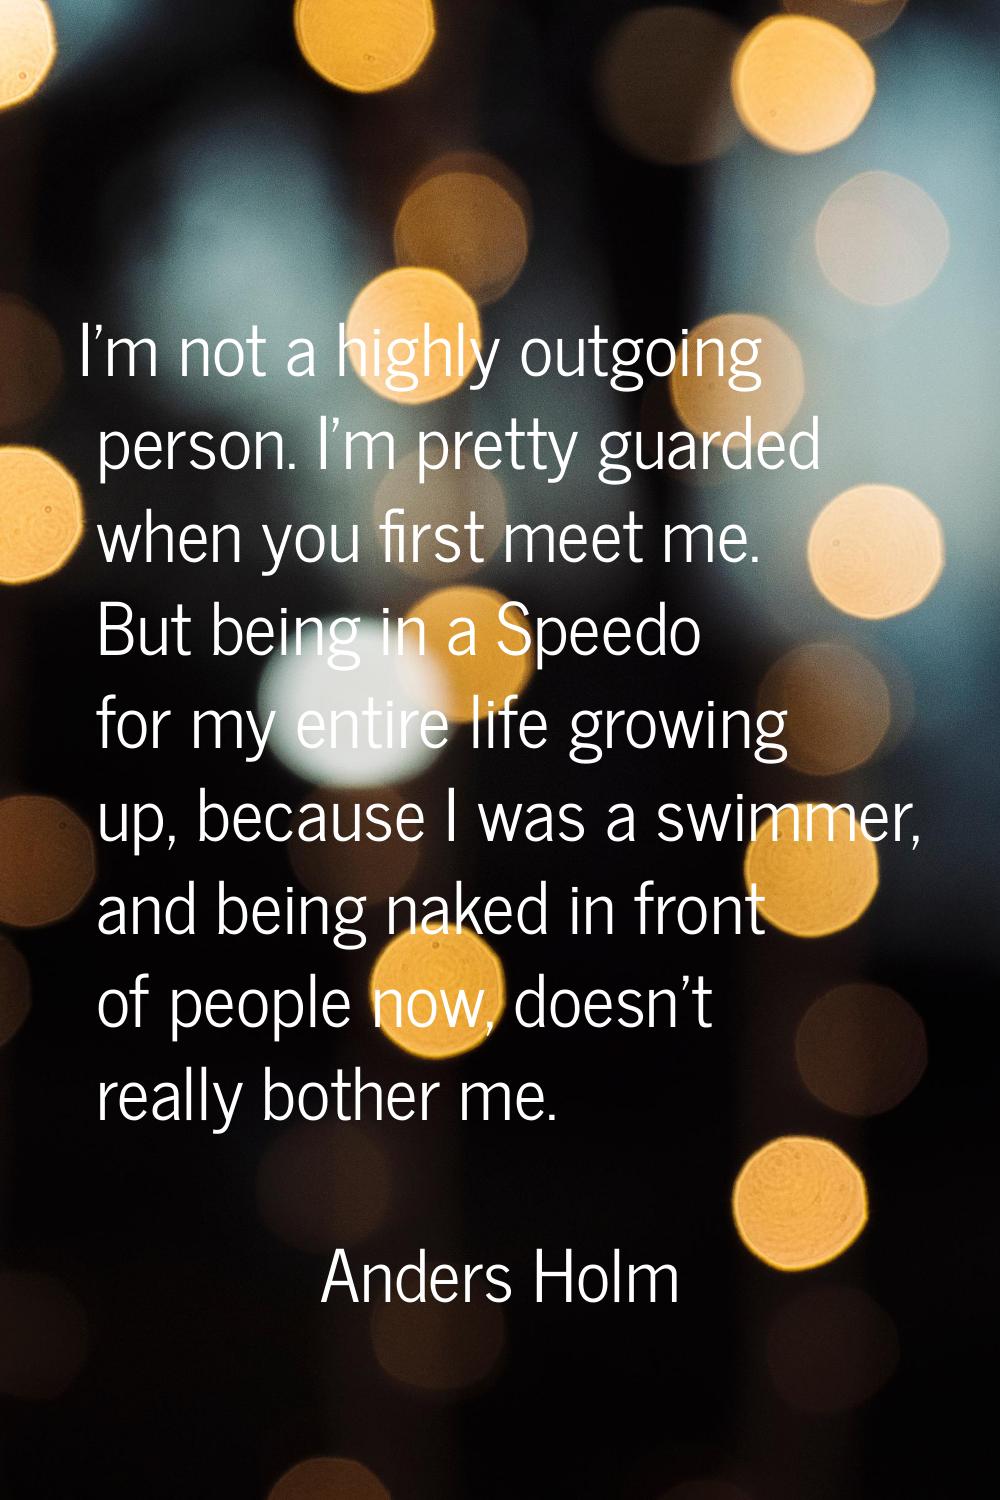 I'm not a highly outgoing person. I'm pretty guarded when you first meet me. But being in a Speedo 